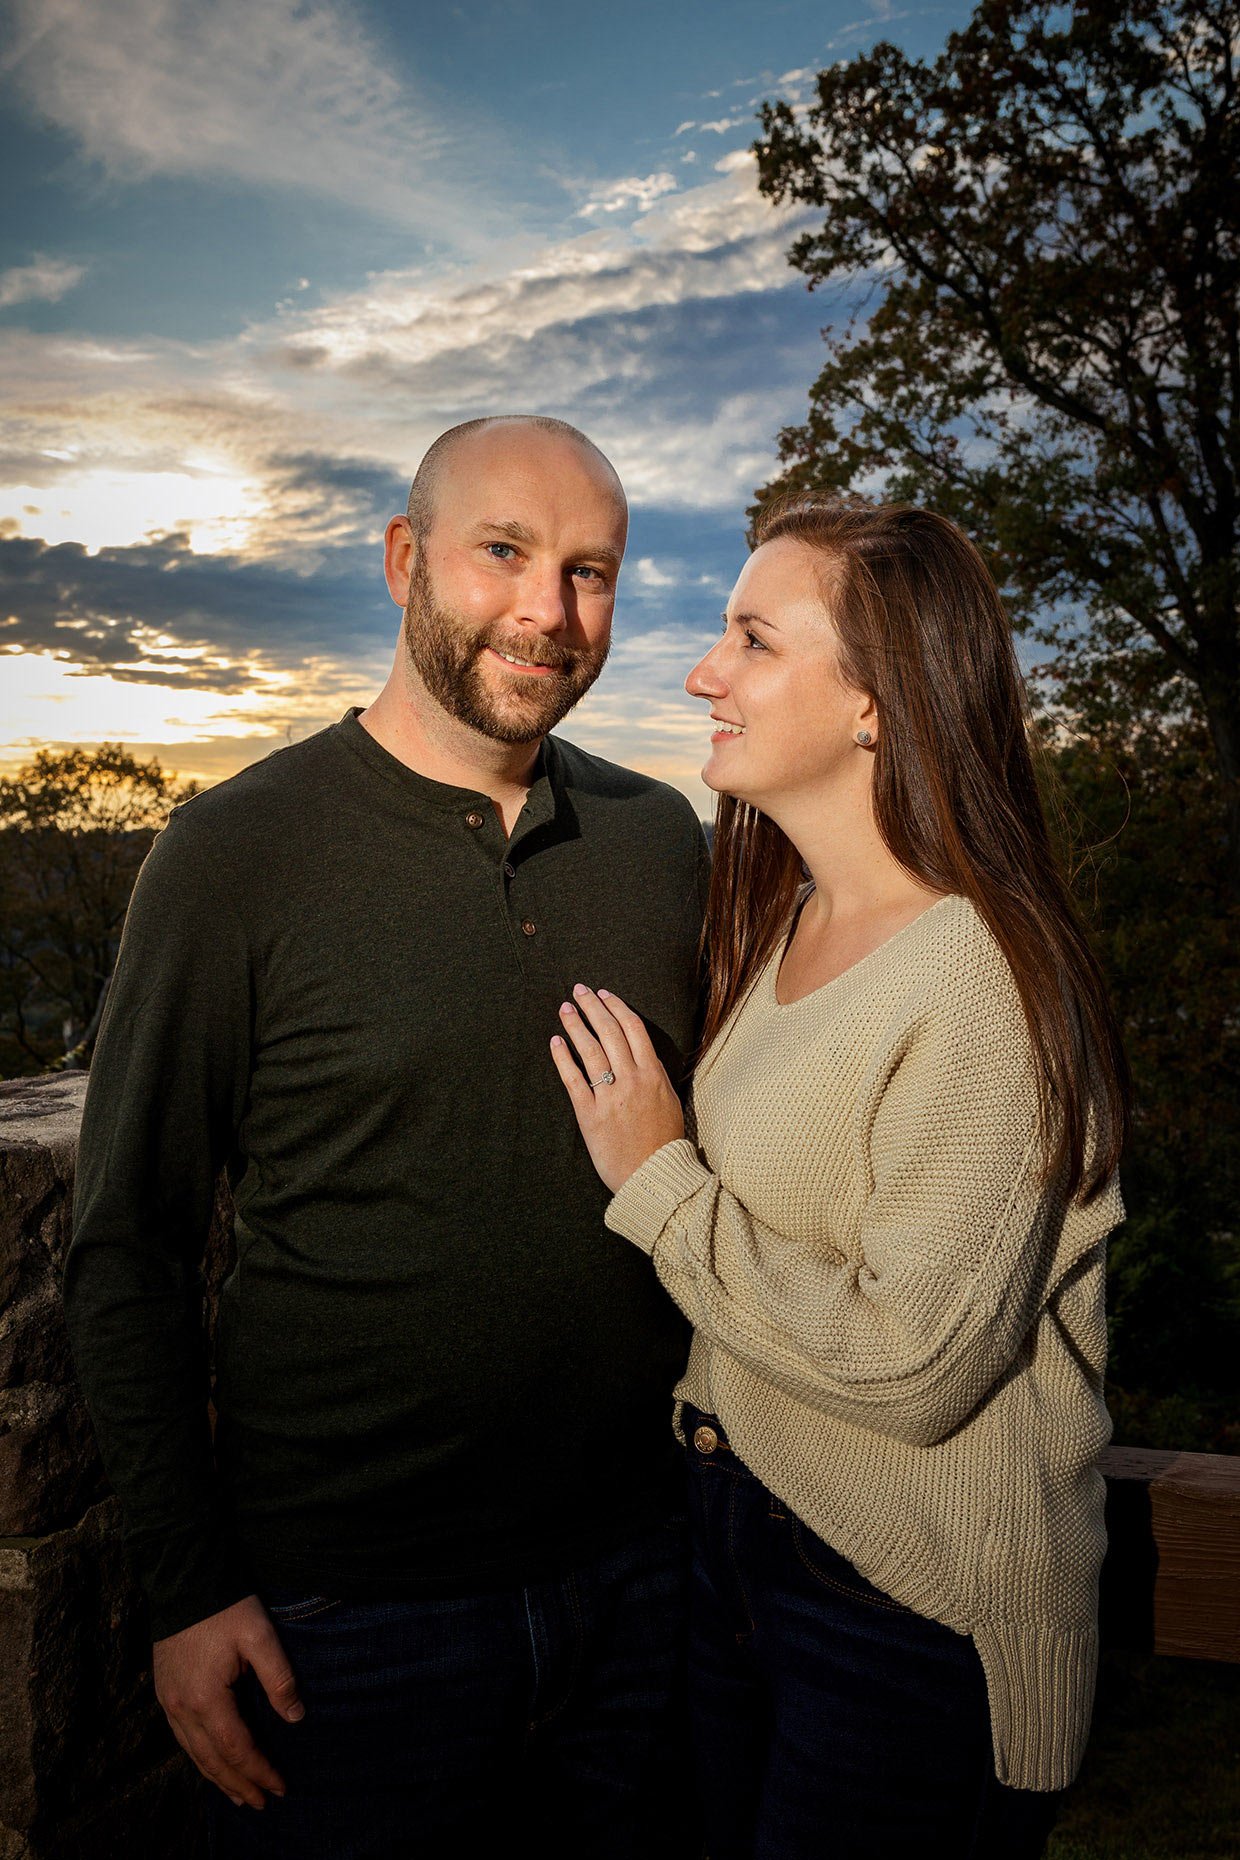 Sunset photo at engagement session